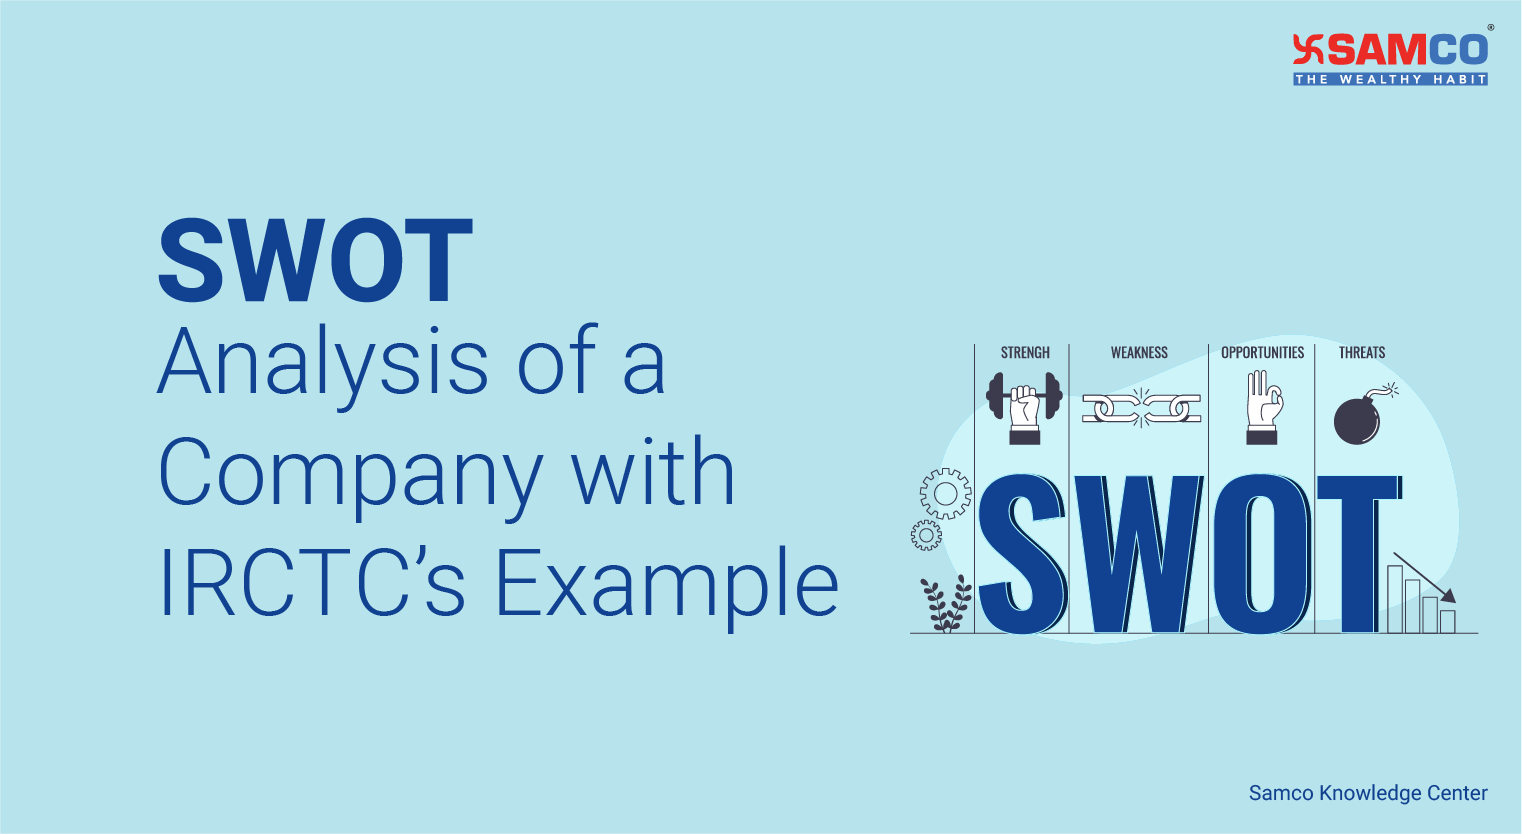 SWOT Analysis of a Company with IRCTC’s Example